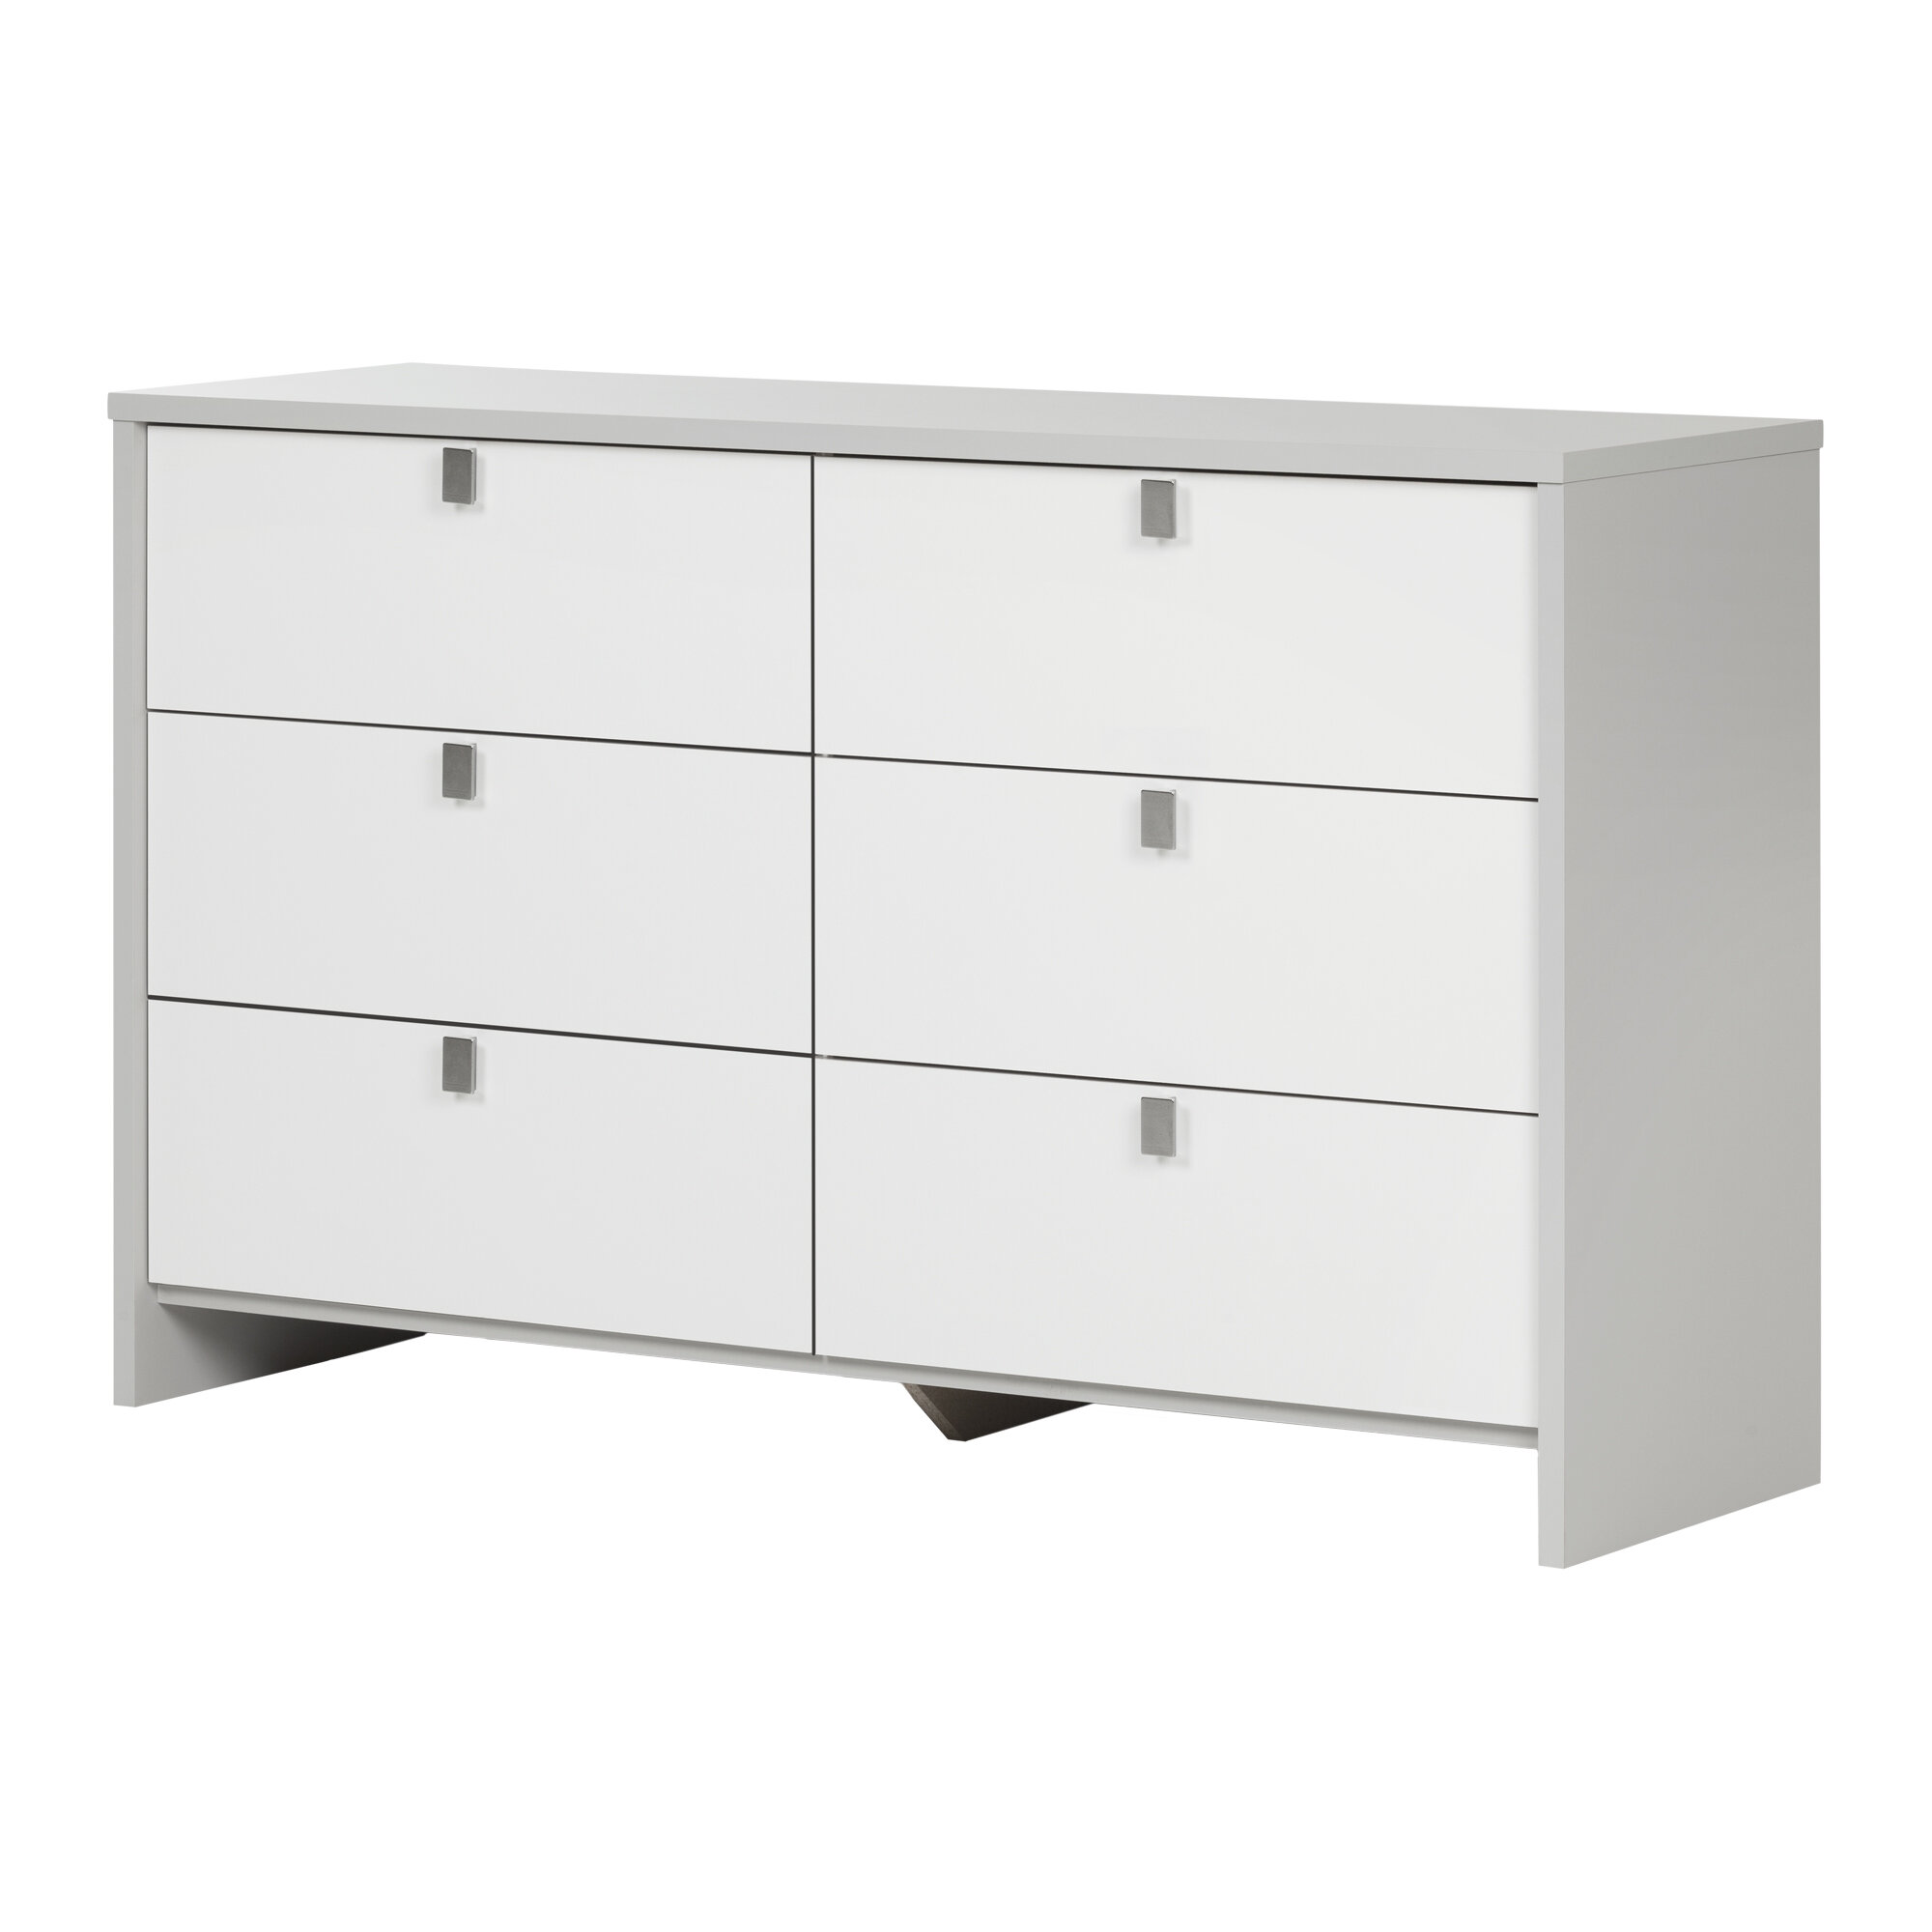 South Shore Cookie 6 Drawer Double Dresser Reviews Wayfair